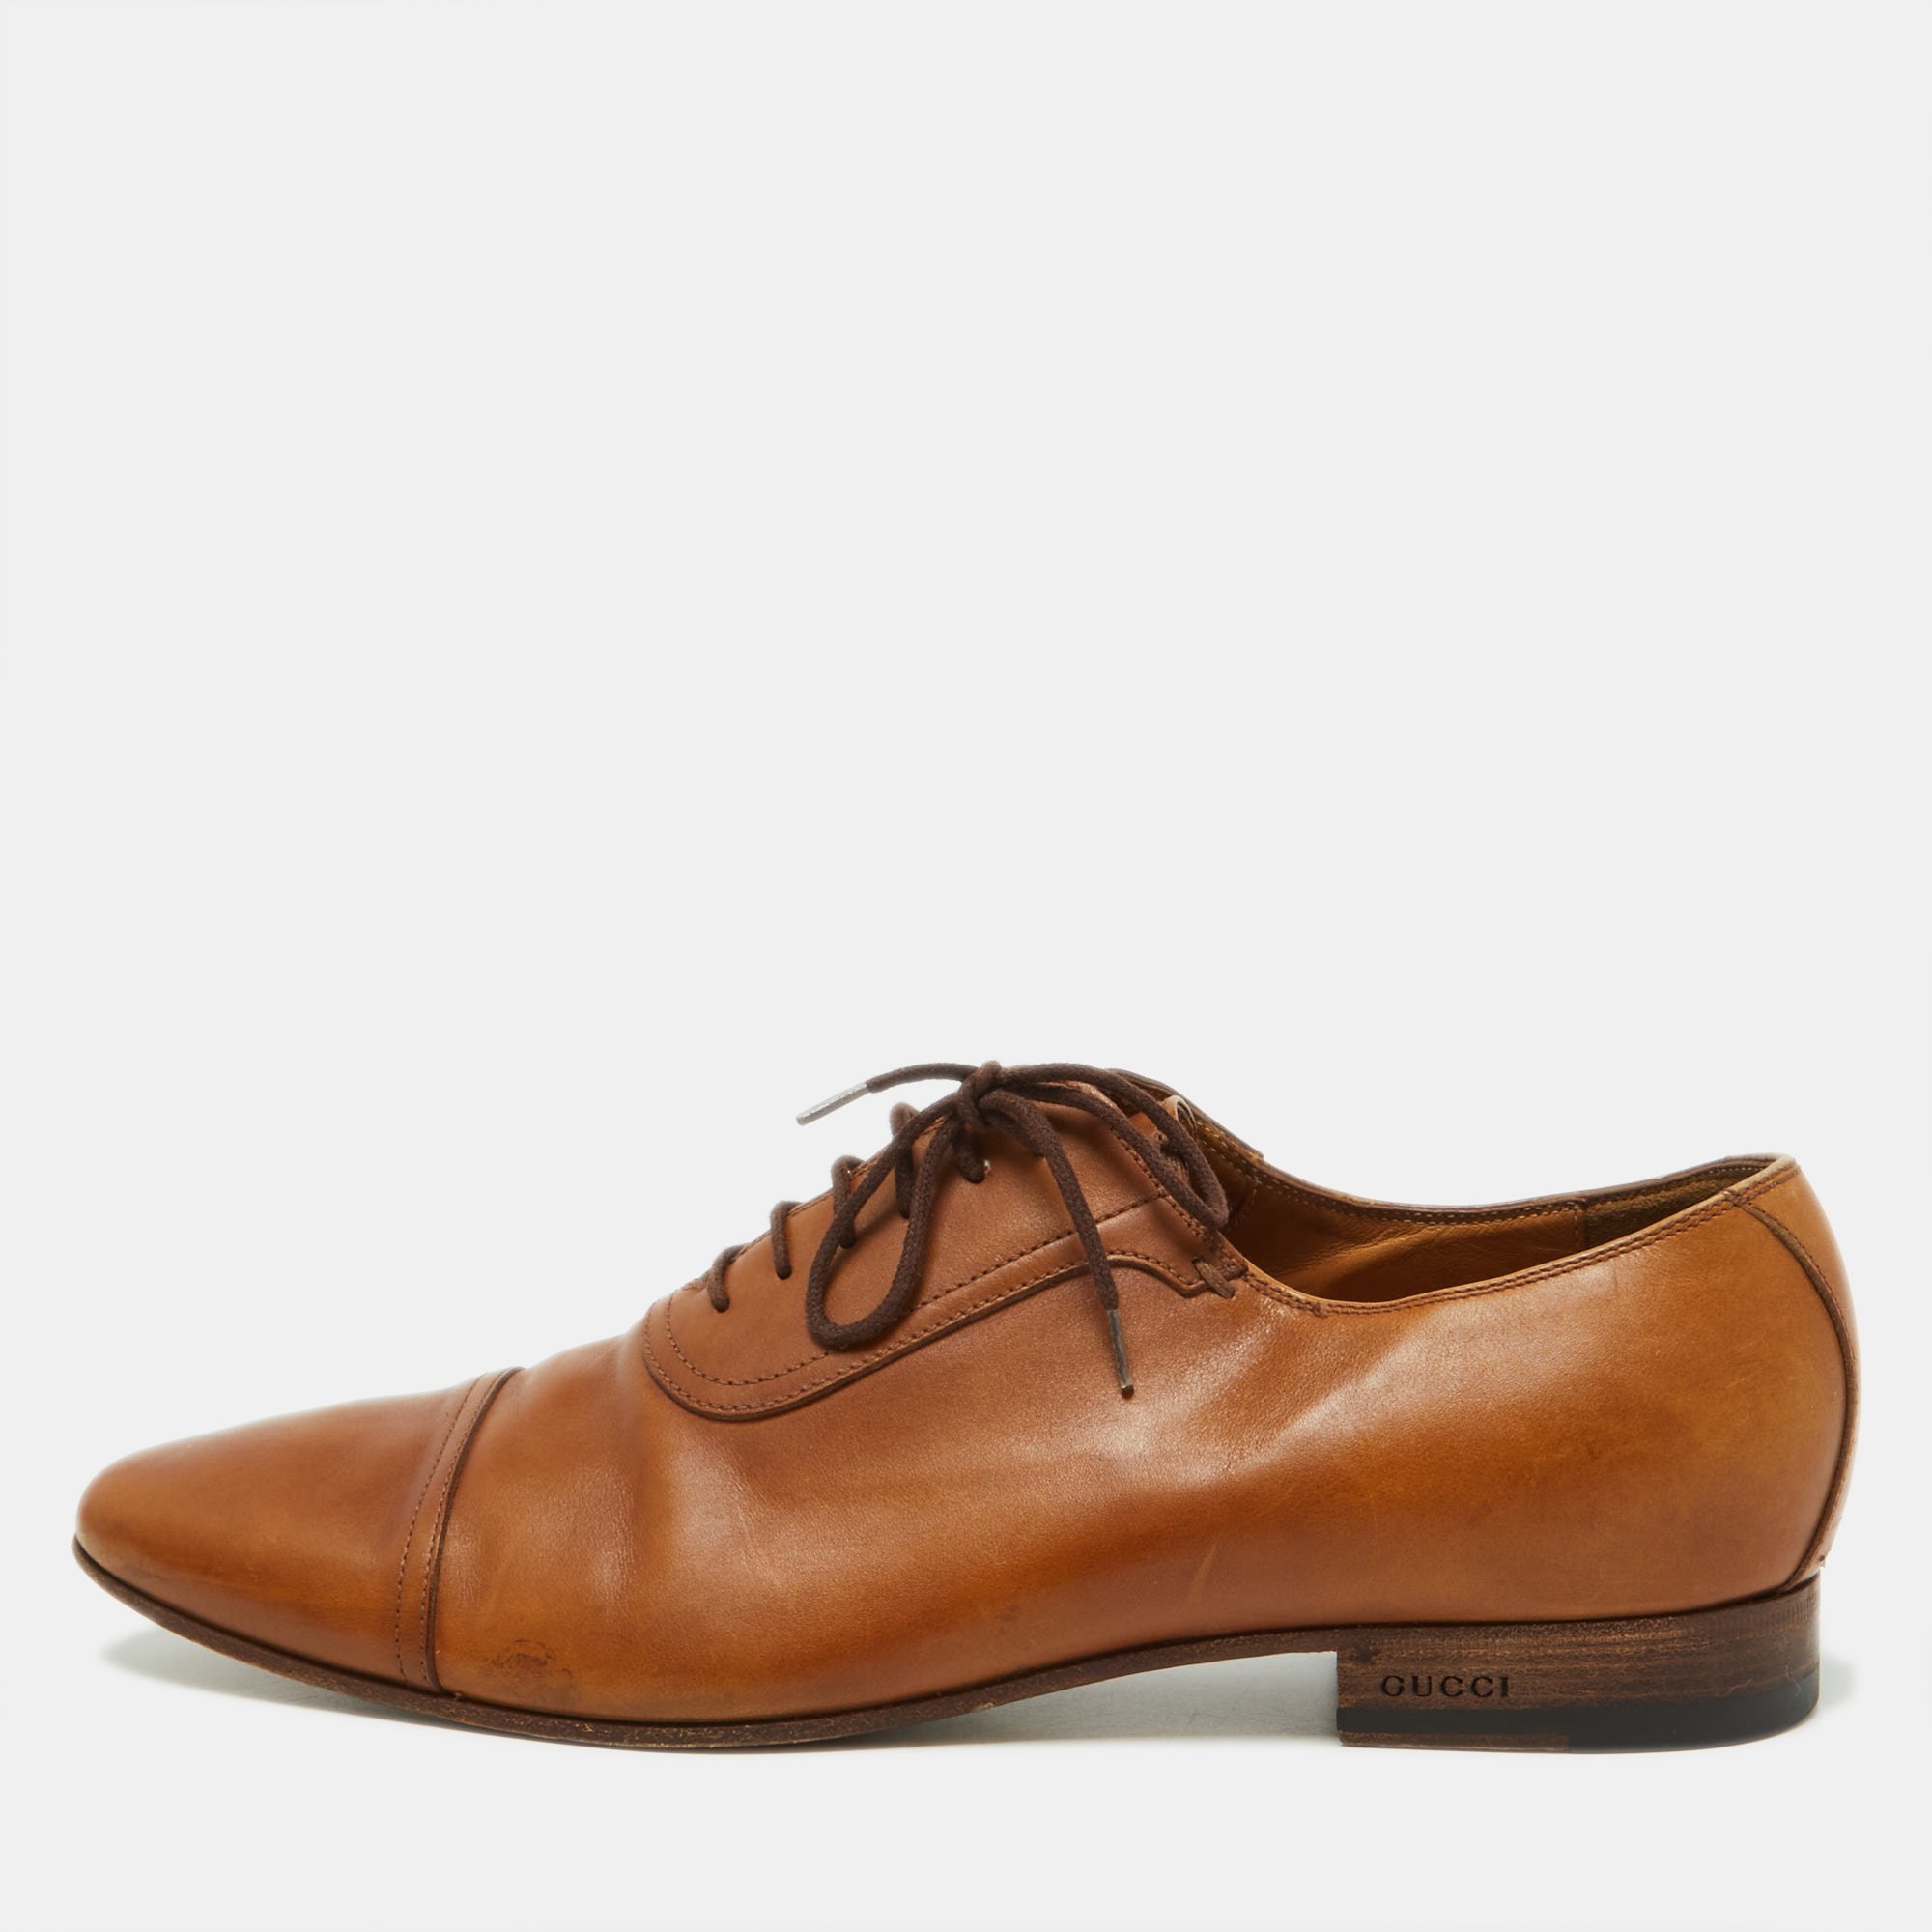 

Gucci Brown Leather Oxfords Size